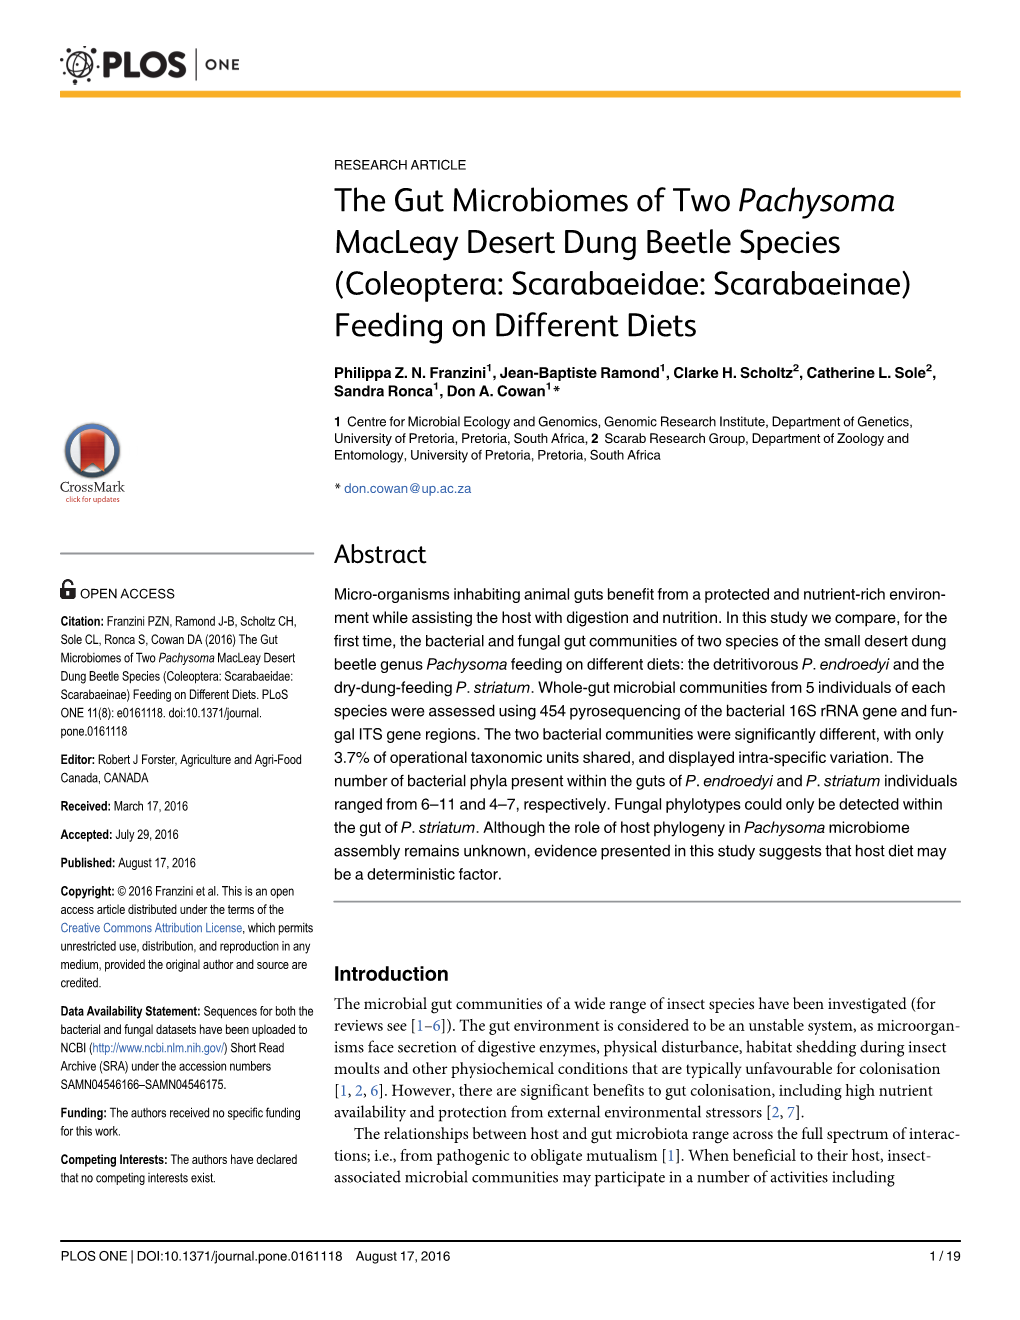 The Gut Microbiomes of Two Pachysoma Macleay Desert Dung Beetle Species (Coleoptera: Scarabaeidae: Scarabaeinae) Feeding on Different Diets